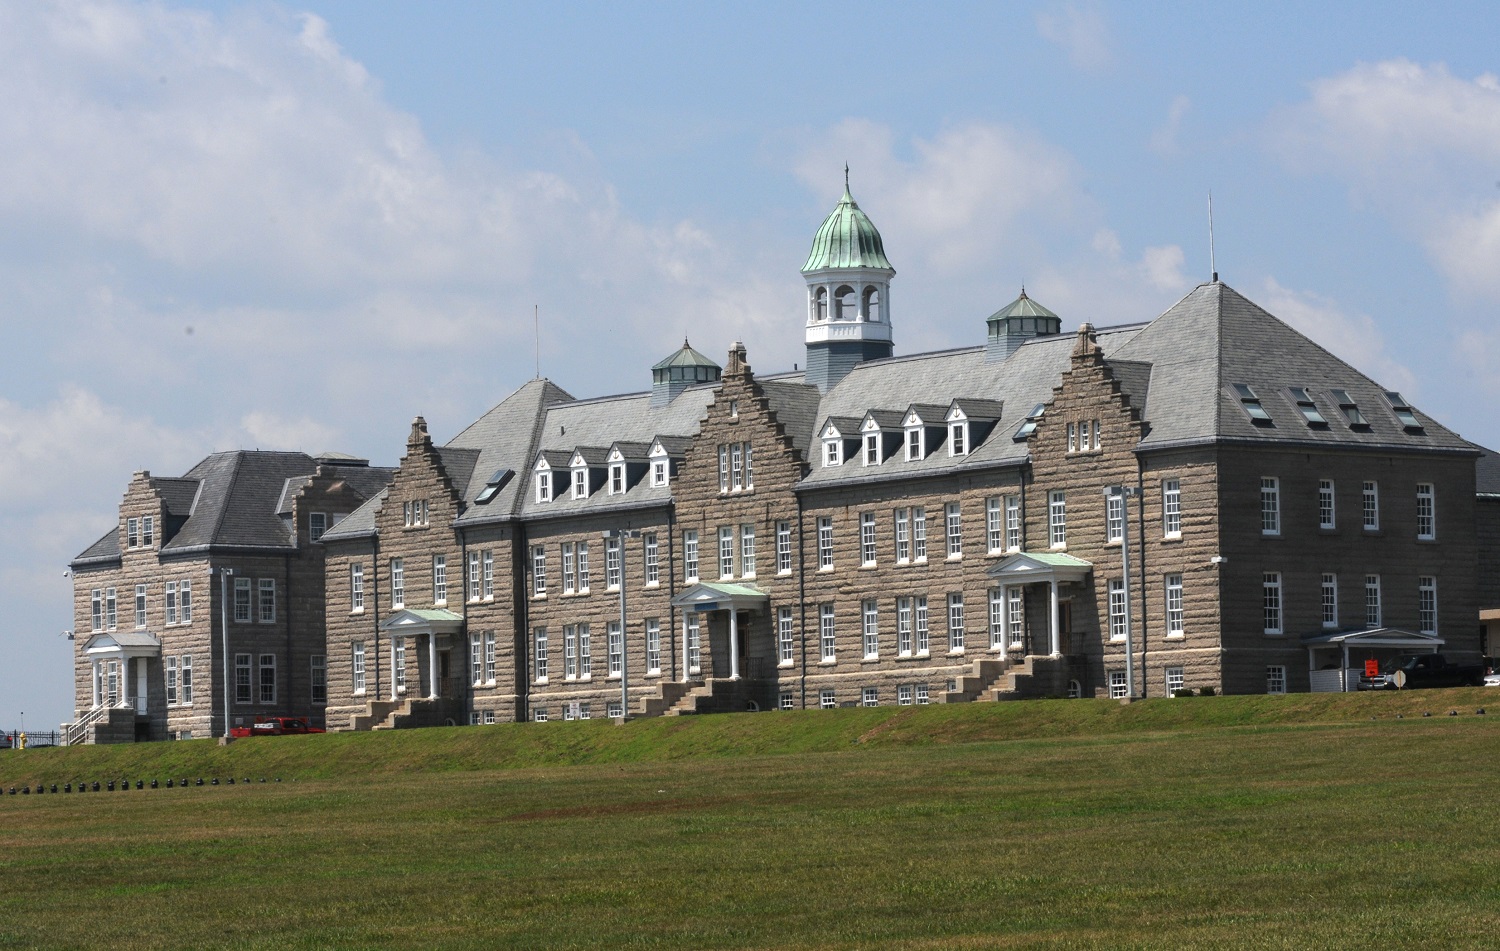 NEWPORT, R.I. (July 30, 2015) U.S. Naval War College's (NWC) Luce Hall located at Naval Station Newport in Newport, Rhode Island. Named after NWC's first president, Rear Adm. Stephen B. Luce, Luce Hall was built in 1892 and is a national historic landmark. Luce founded NWC's study of strategy, tactics, and operations based on a core of history. His lectures, readings, and seminars transformed from a month-long course to an intensive one-year professional naval study. Luce Hall now houses NWC's Naval Command College and College of International Programs. U.S. Navy photo by Haley Nace 